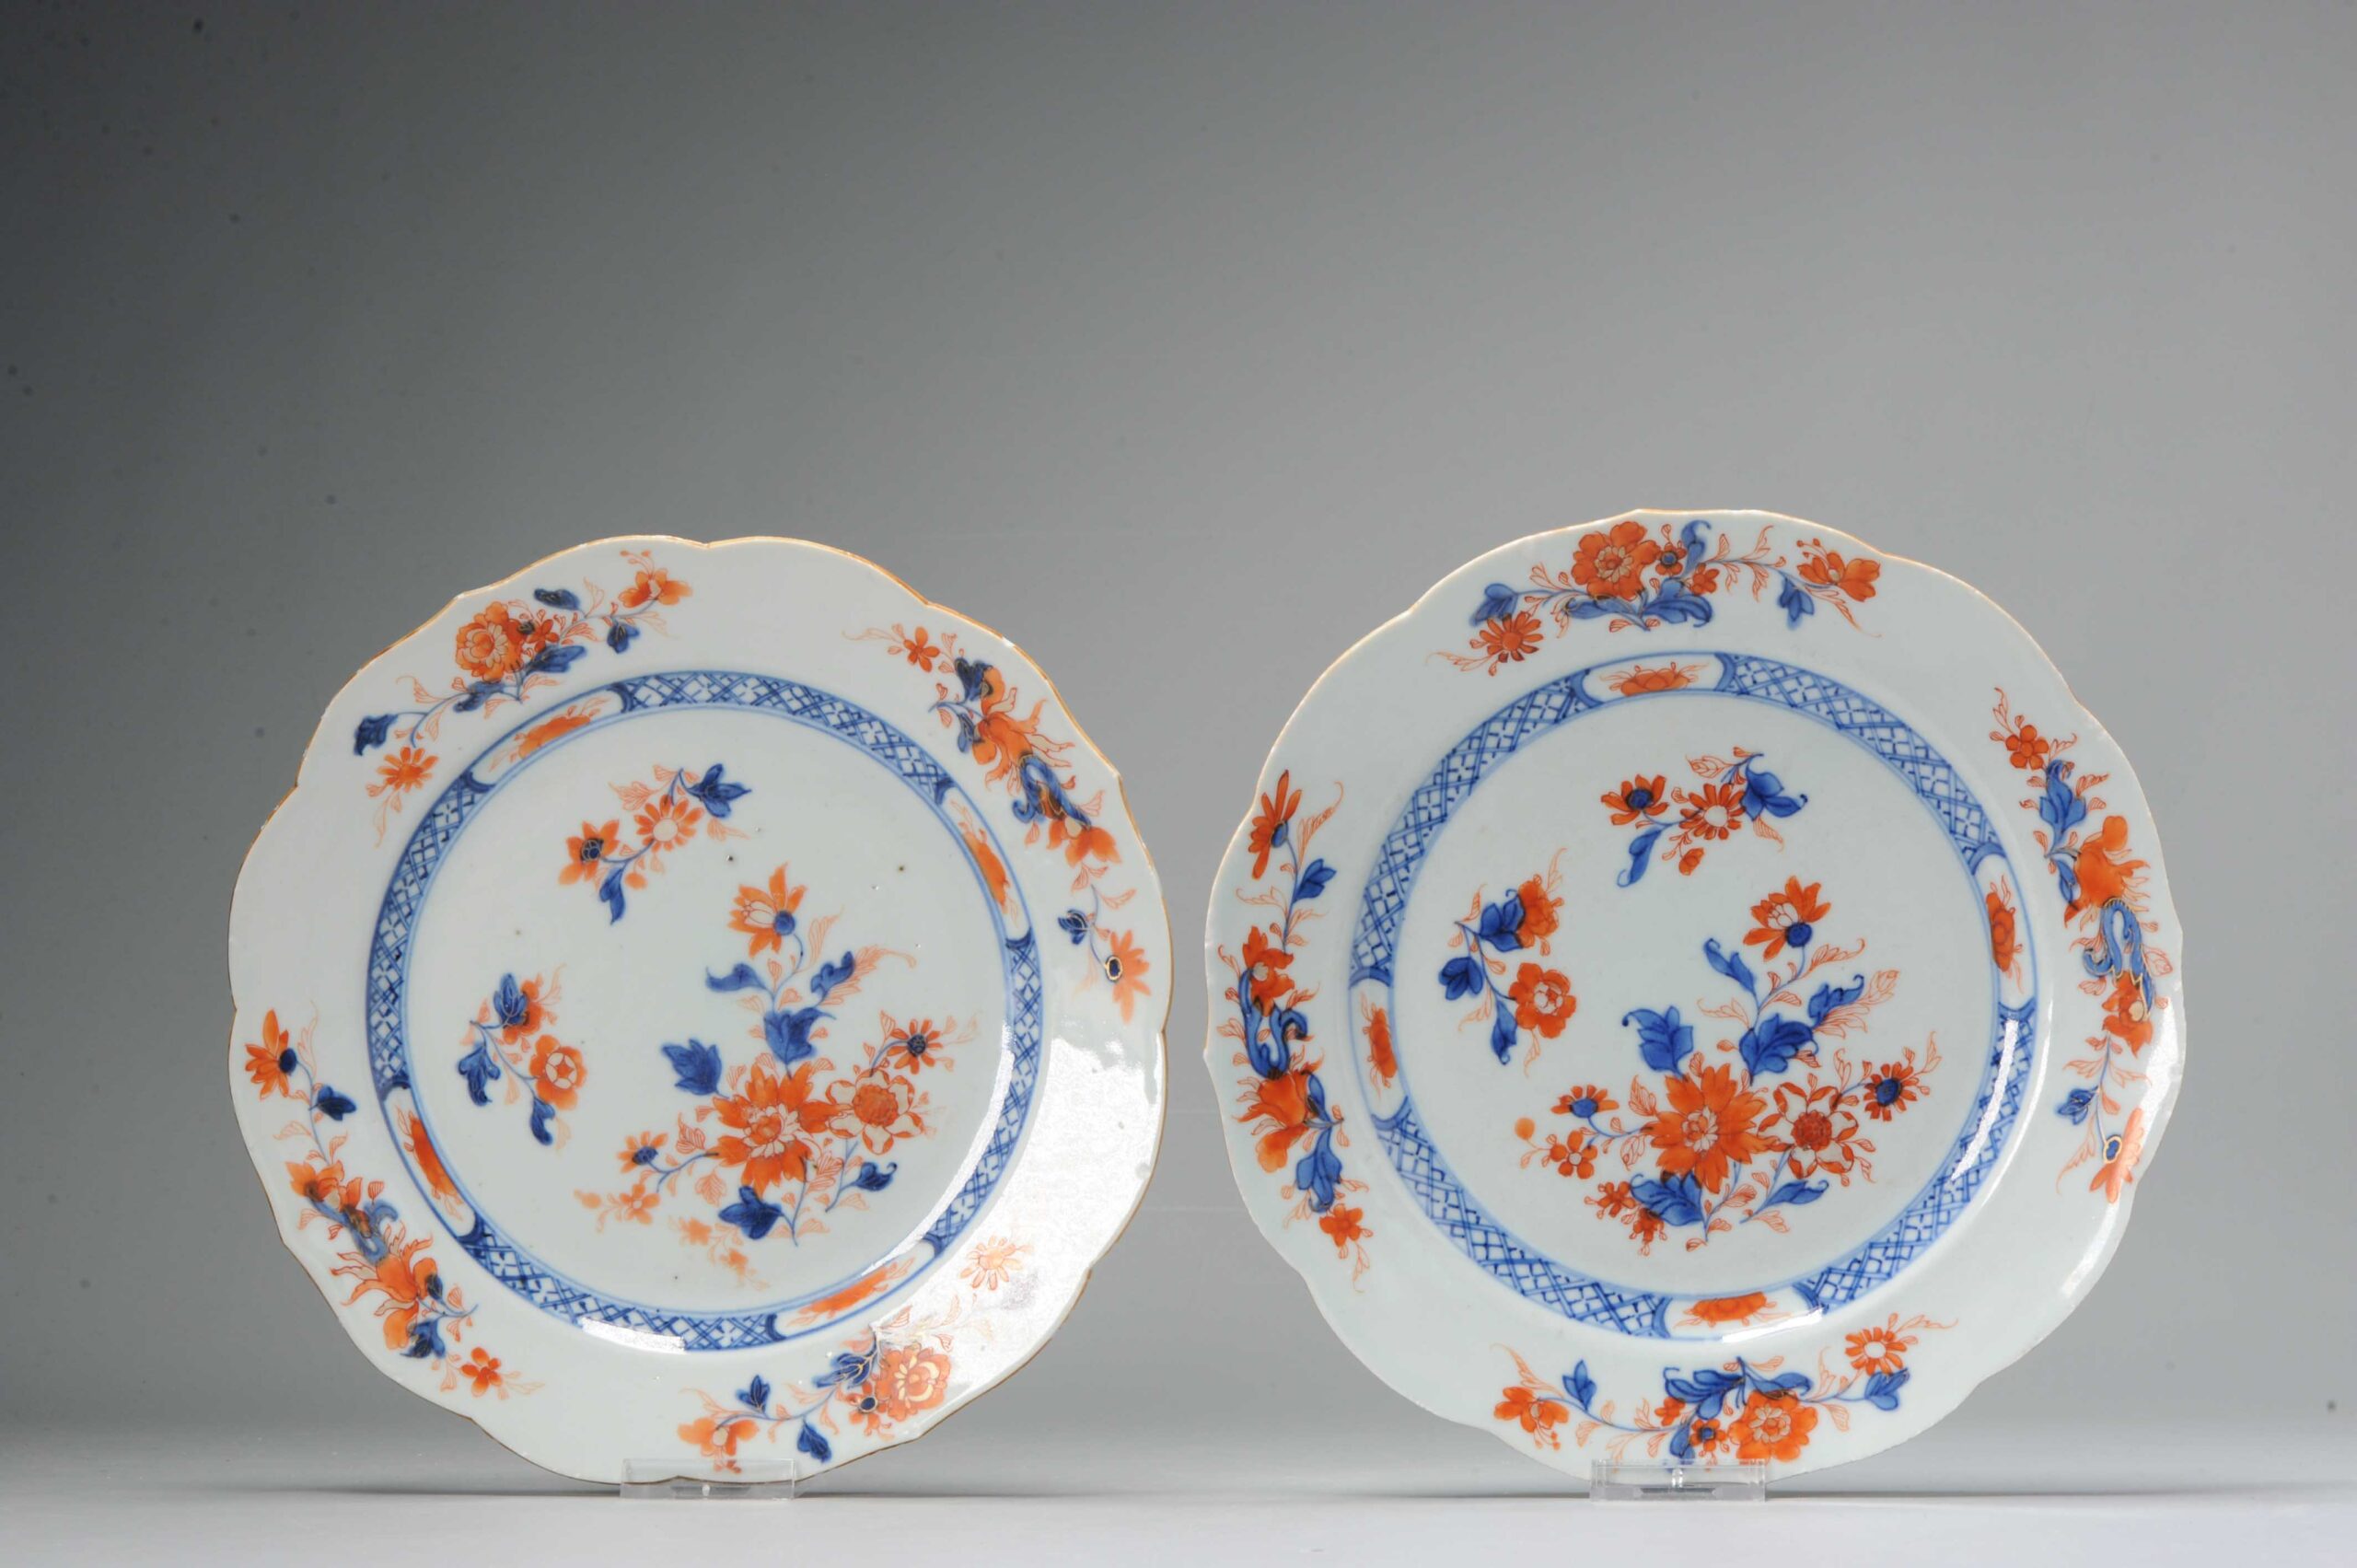 A Lovely Pair 18th c Period Chinese Porcelain Qianlong Imari Flower Plate Dish Antique